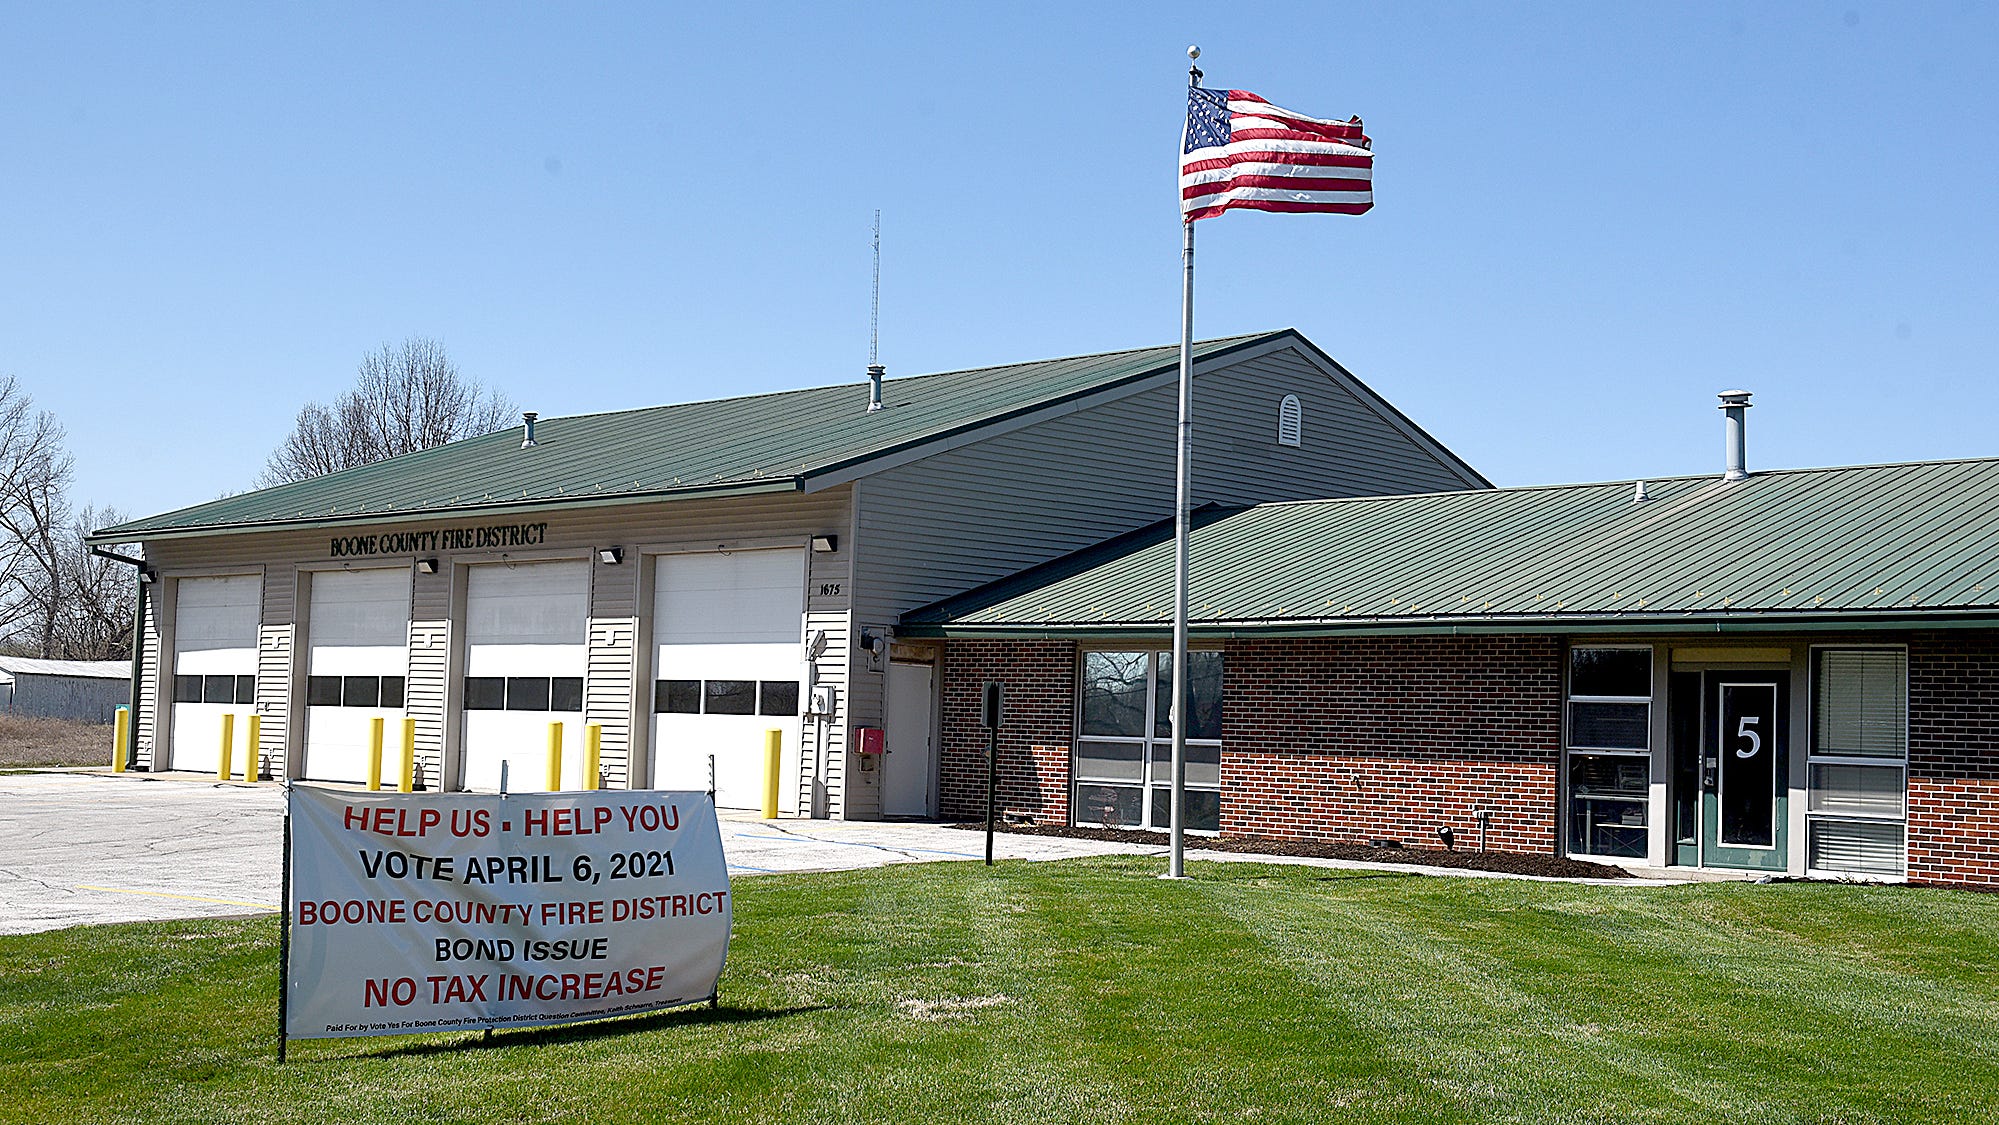 Boone County Fire Protection District bond issue approved